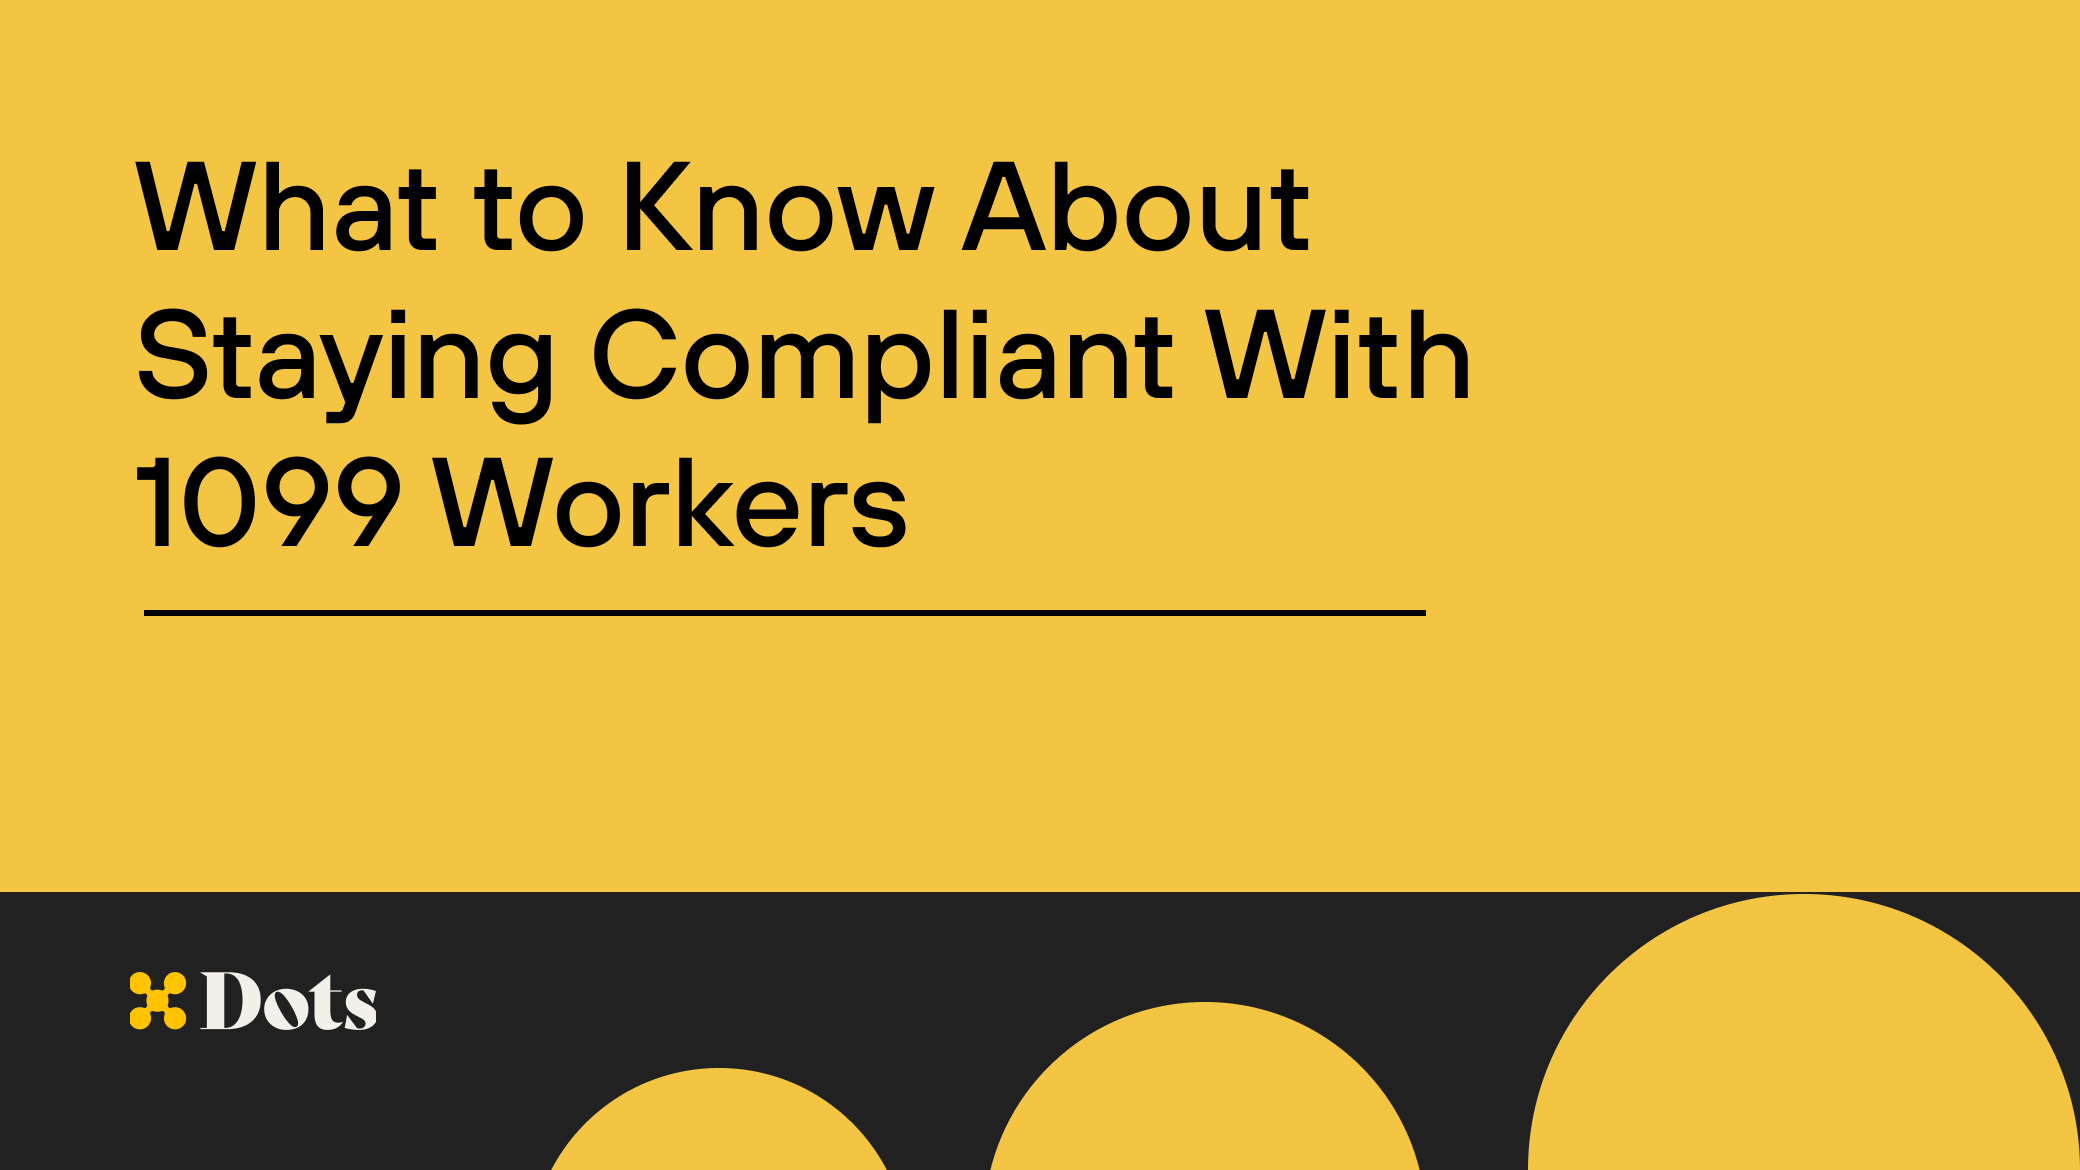 Compliance for Independent Contractors and 1099 Workers: What to Know